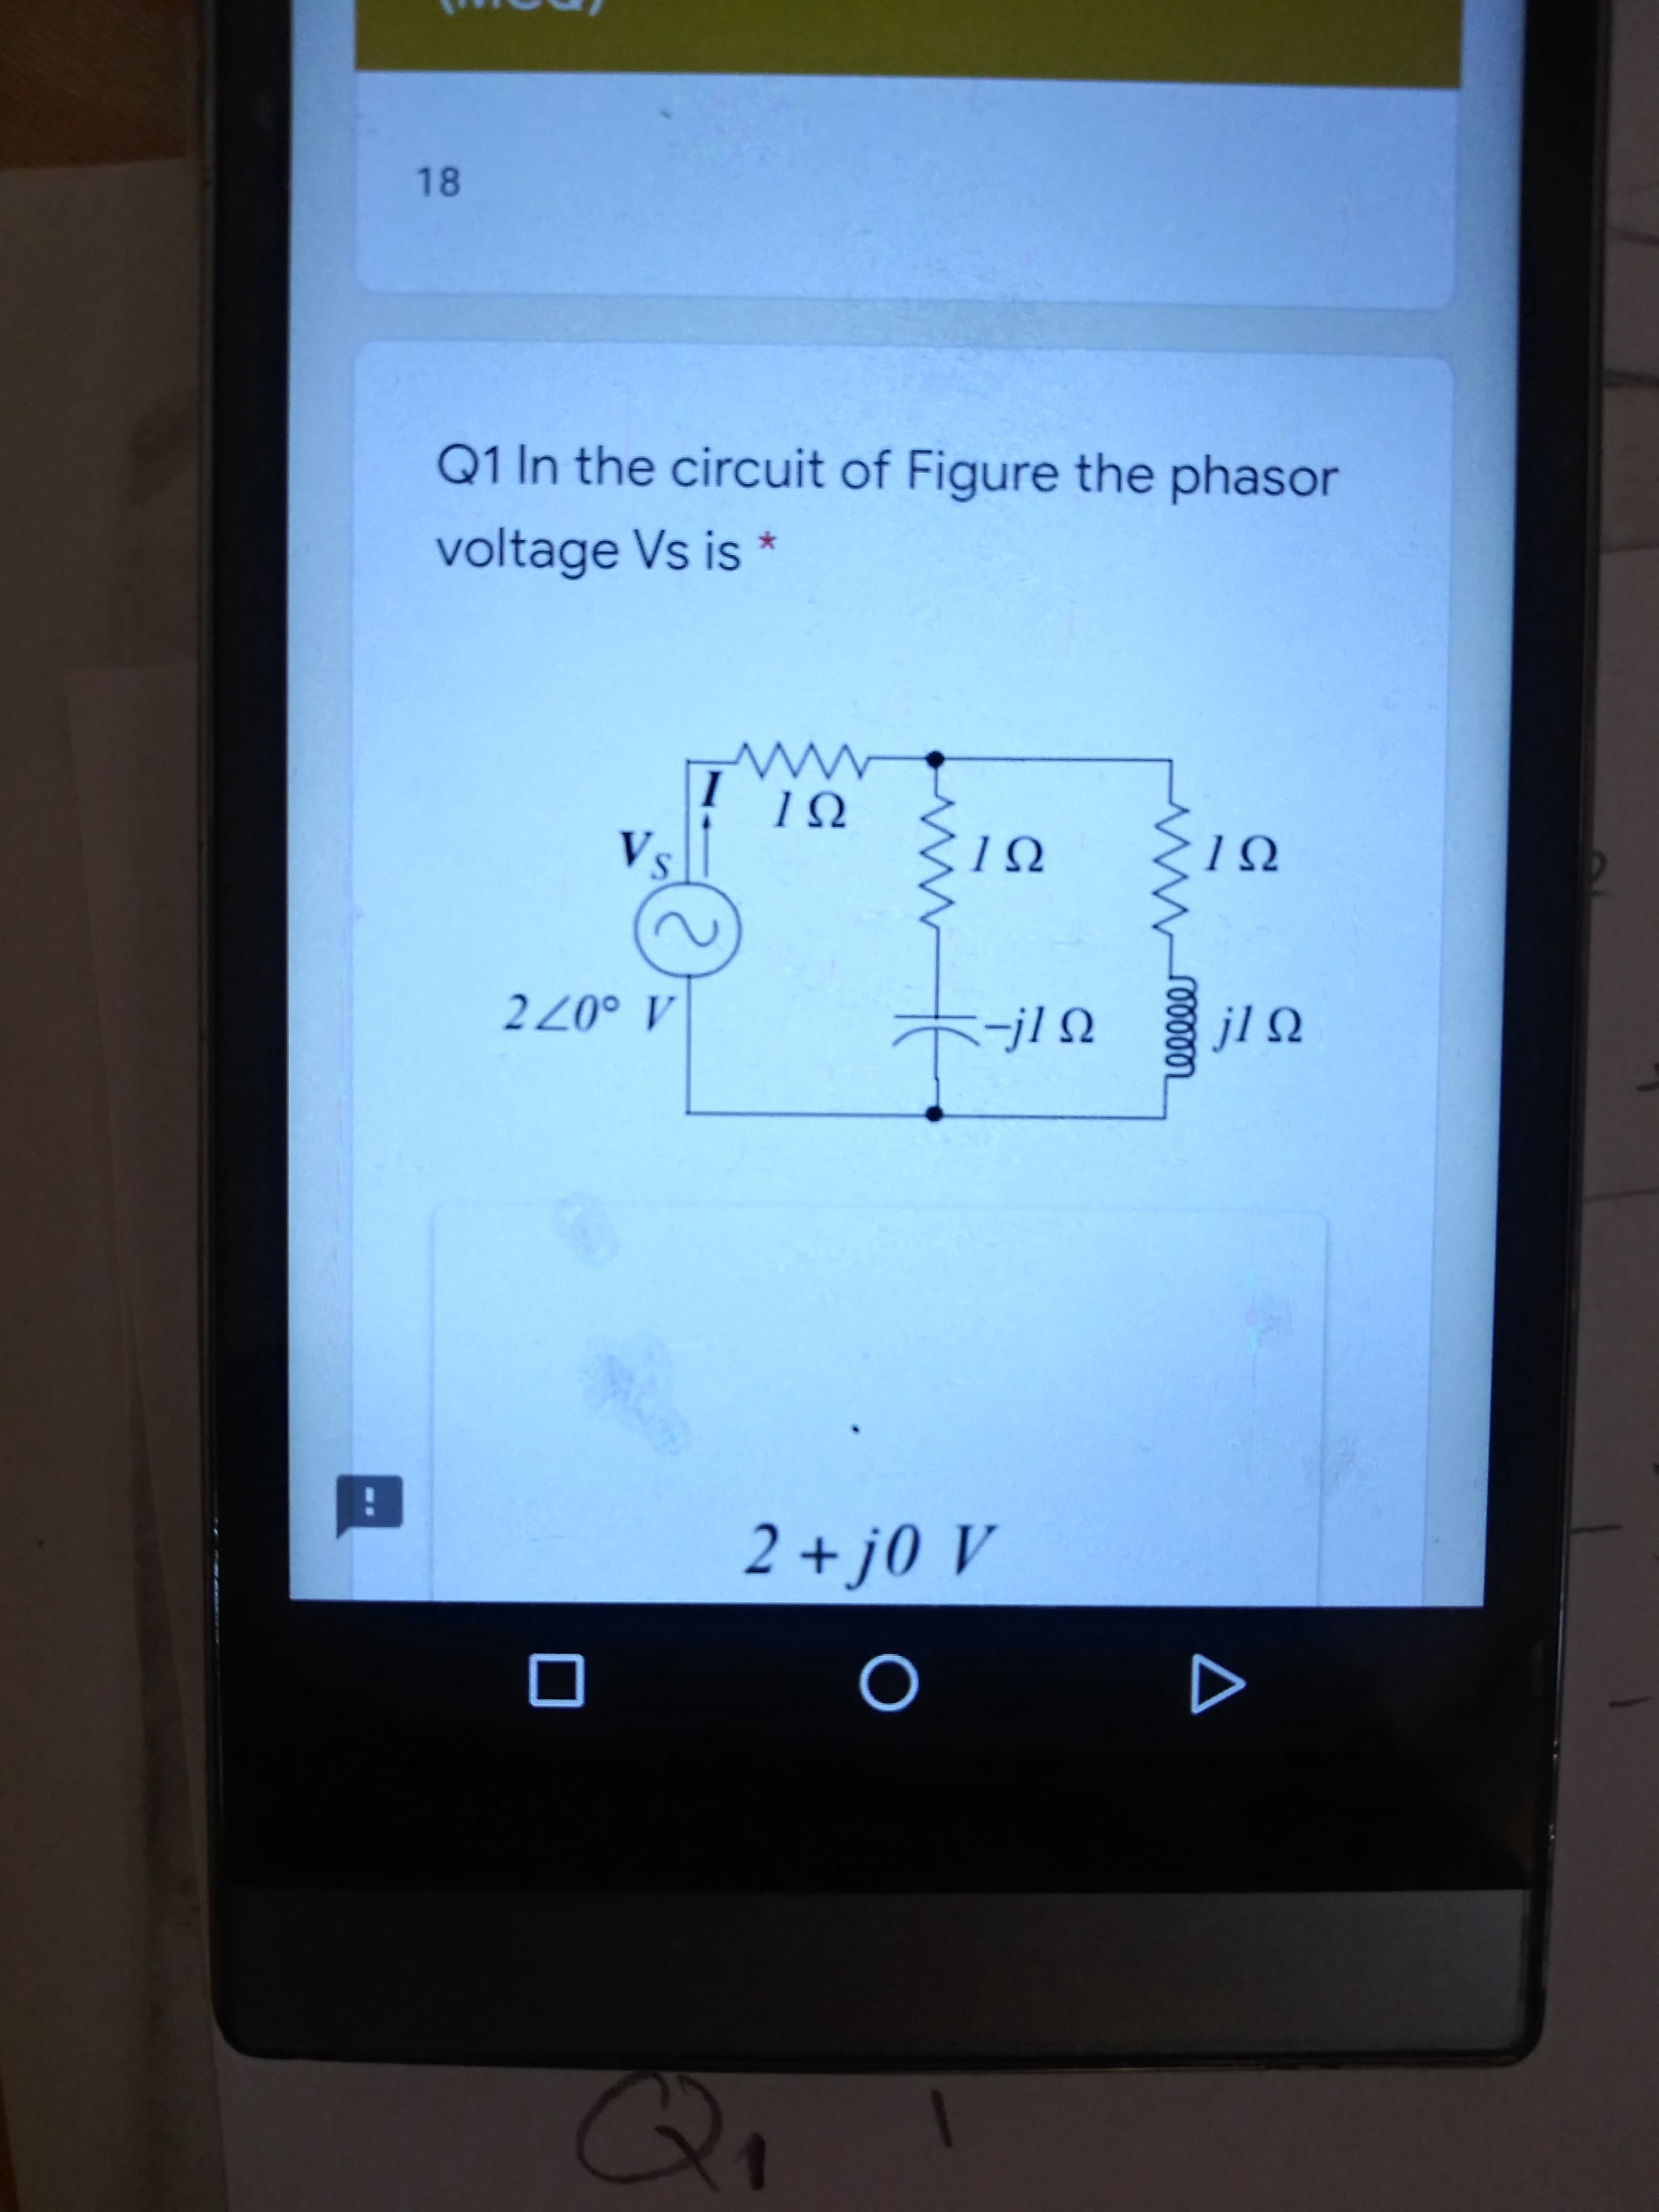 Q1 In the circuit of Figure the phasor
voltage Vs is *
1Ω
Vs
1Ω
-jl Q
jlQ
A 0077
2 + j0 V
